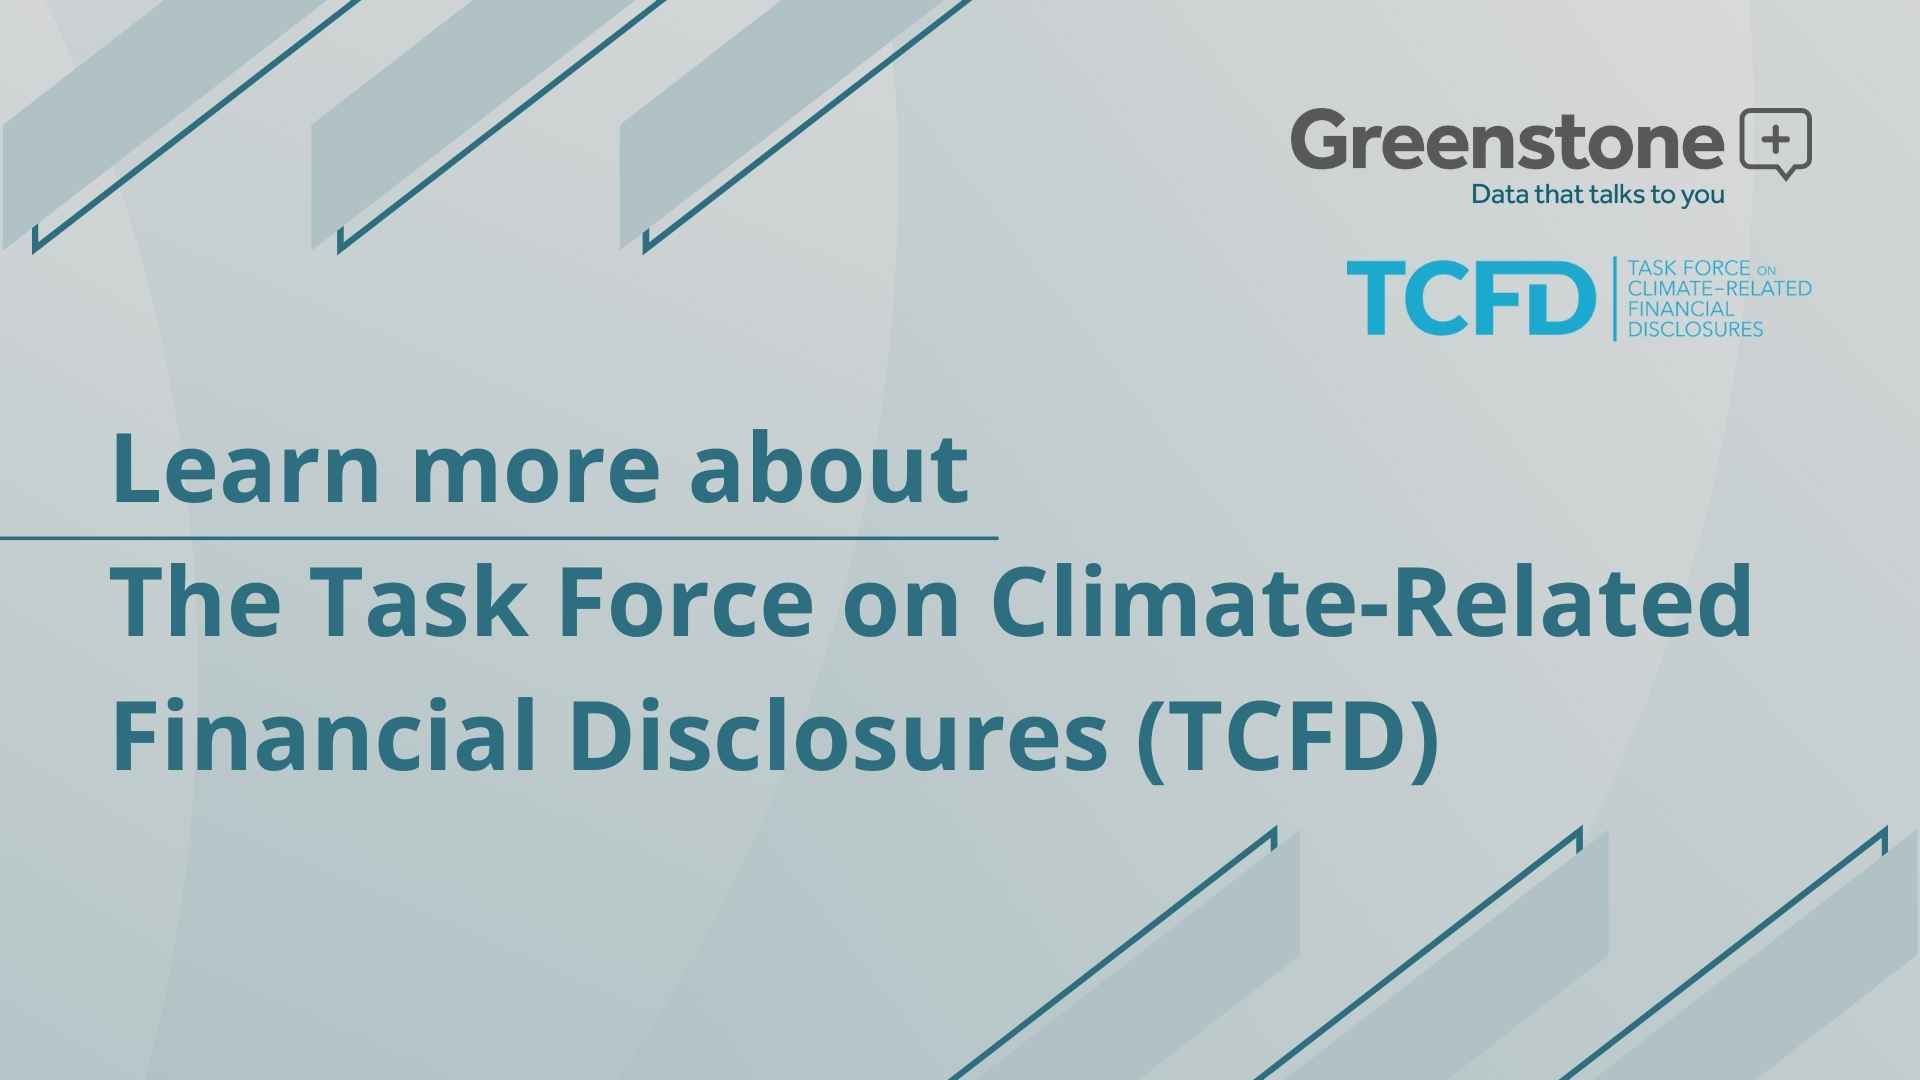 Greenstone & The Task Force on Climate Related Financial Disclosures (TCFD)